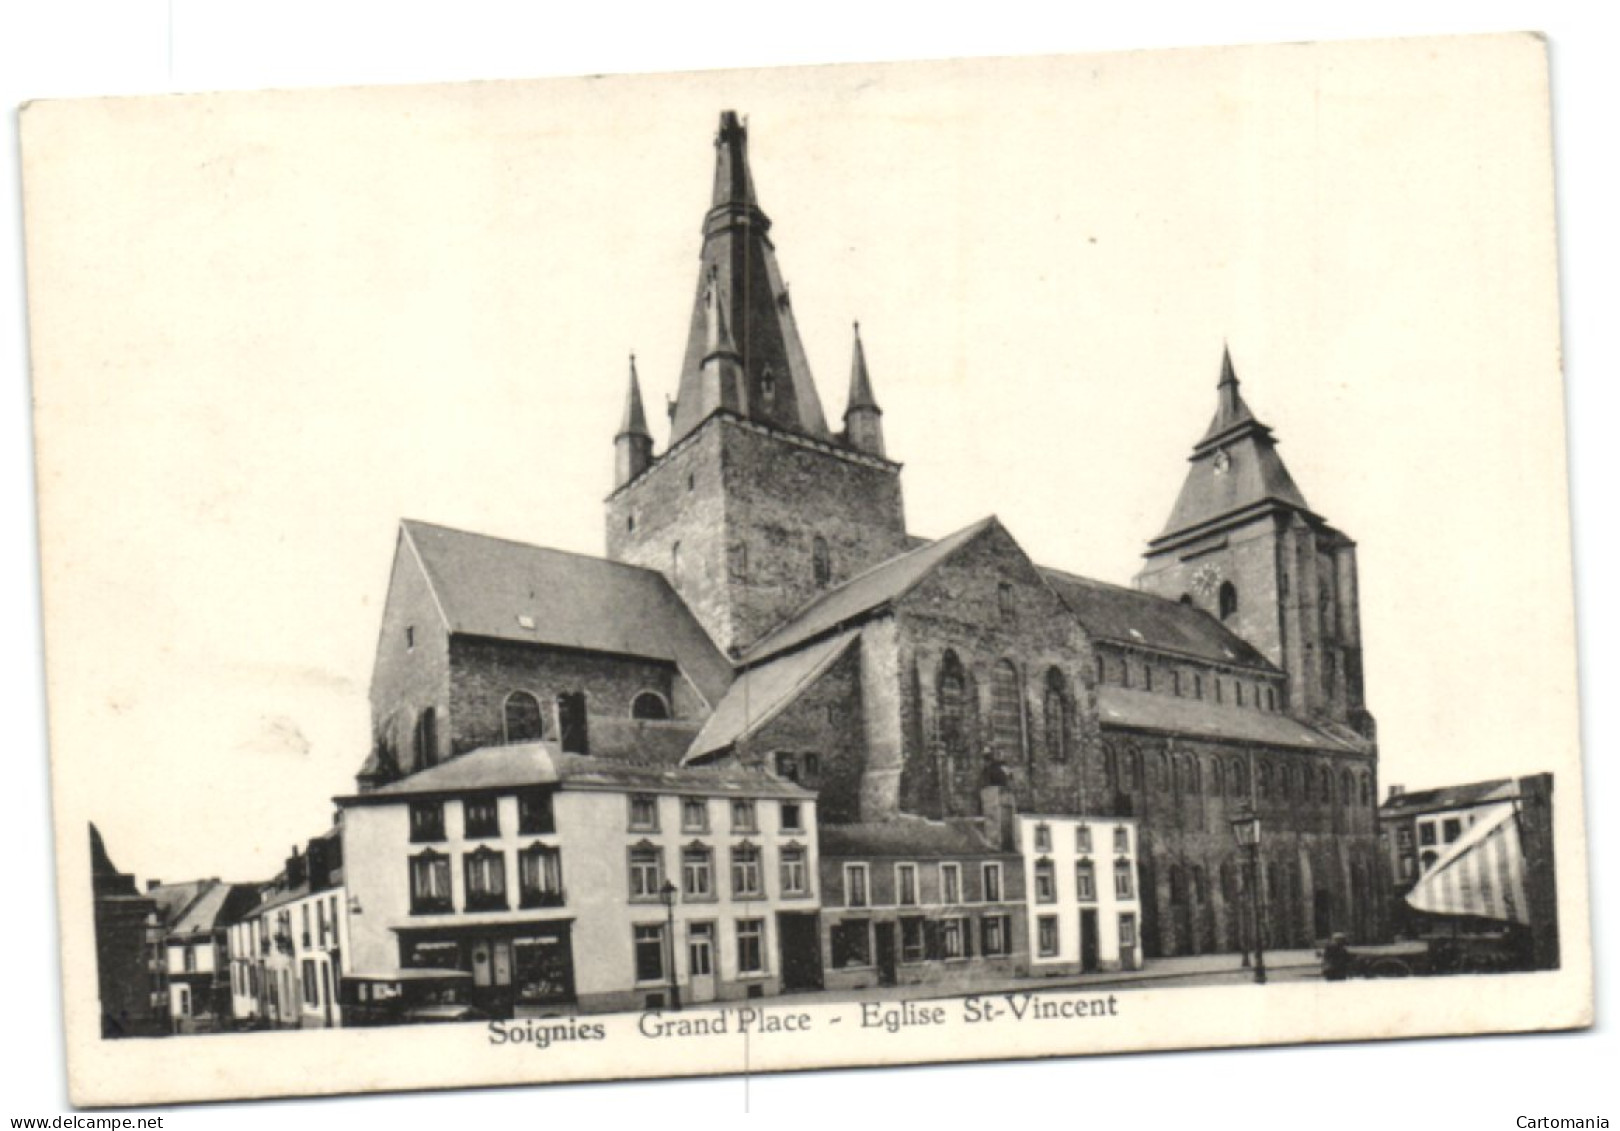 Soignies - Grand'Place - Eglise St-Vincent - Soignies